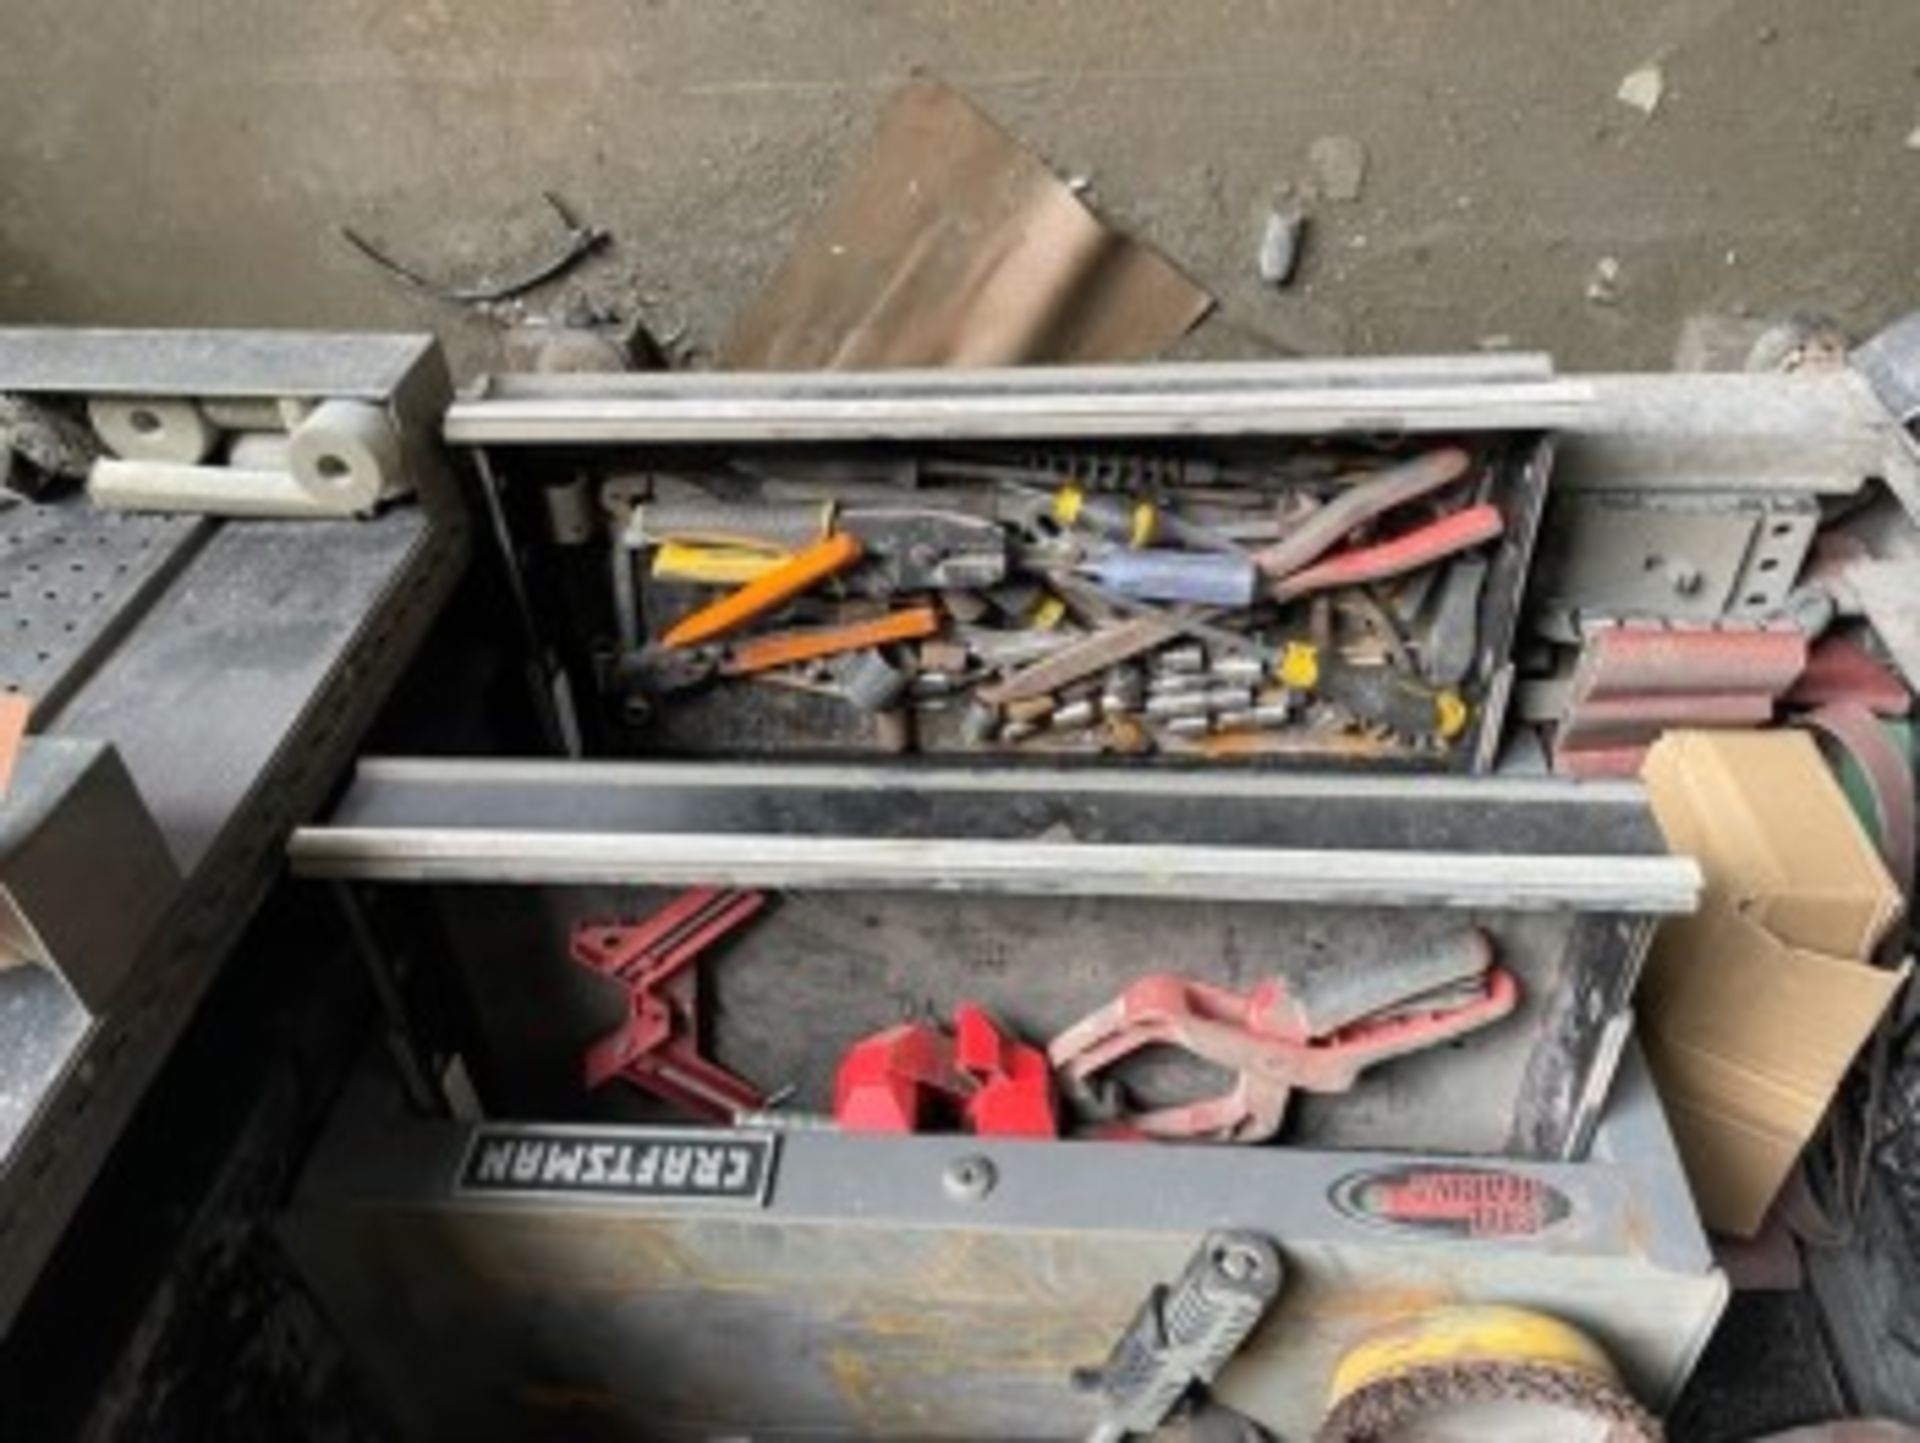 CRAFTSMAN STEEL CABINET WITH 2 CRAFTSMAN TOOL BOXES (MISSING DRAWERS) WITH CONTENTS (TOOLS, ETC) (LO - Image 2 of 4